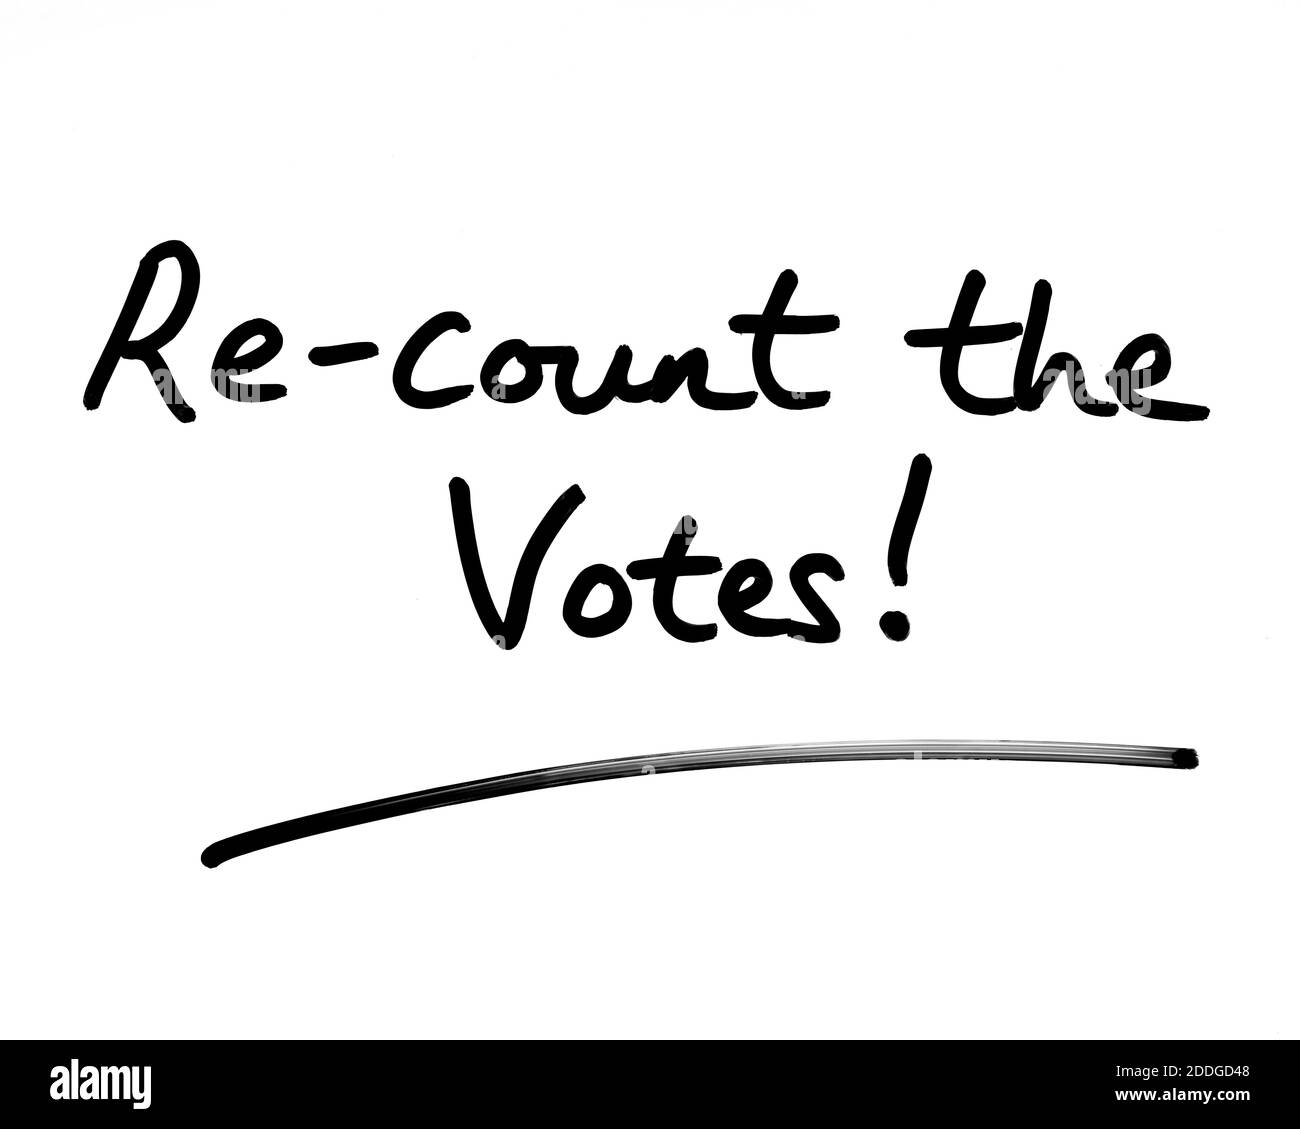 Re-count the Votes! handwritten on a white background. Stock Photo